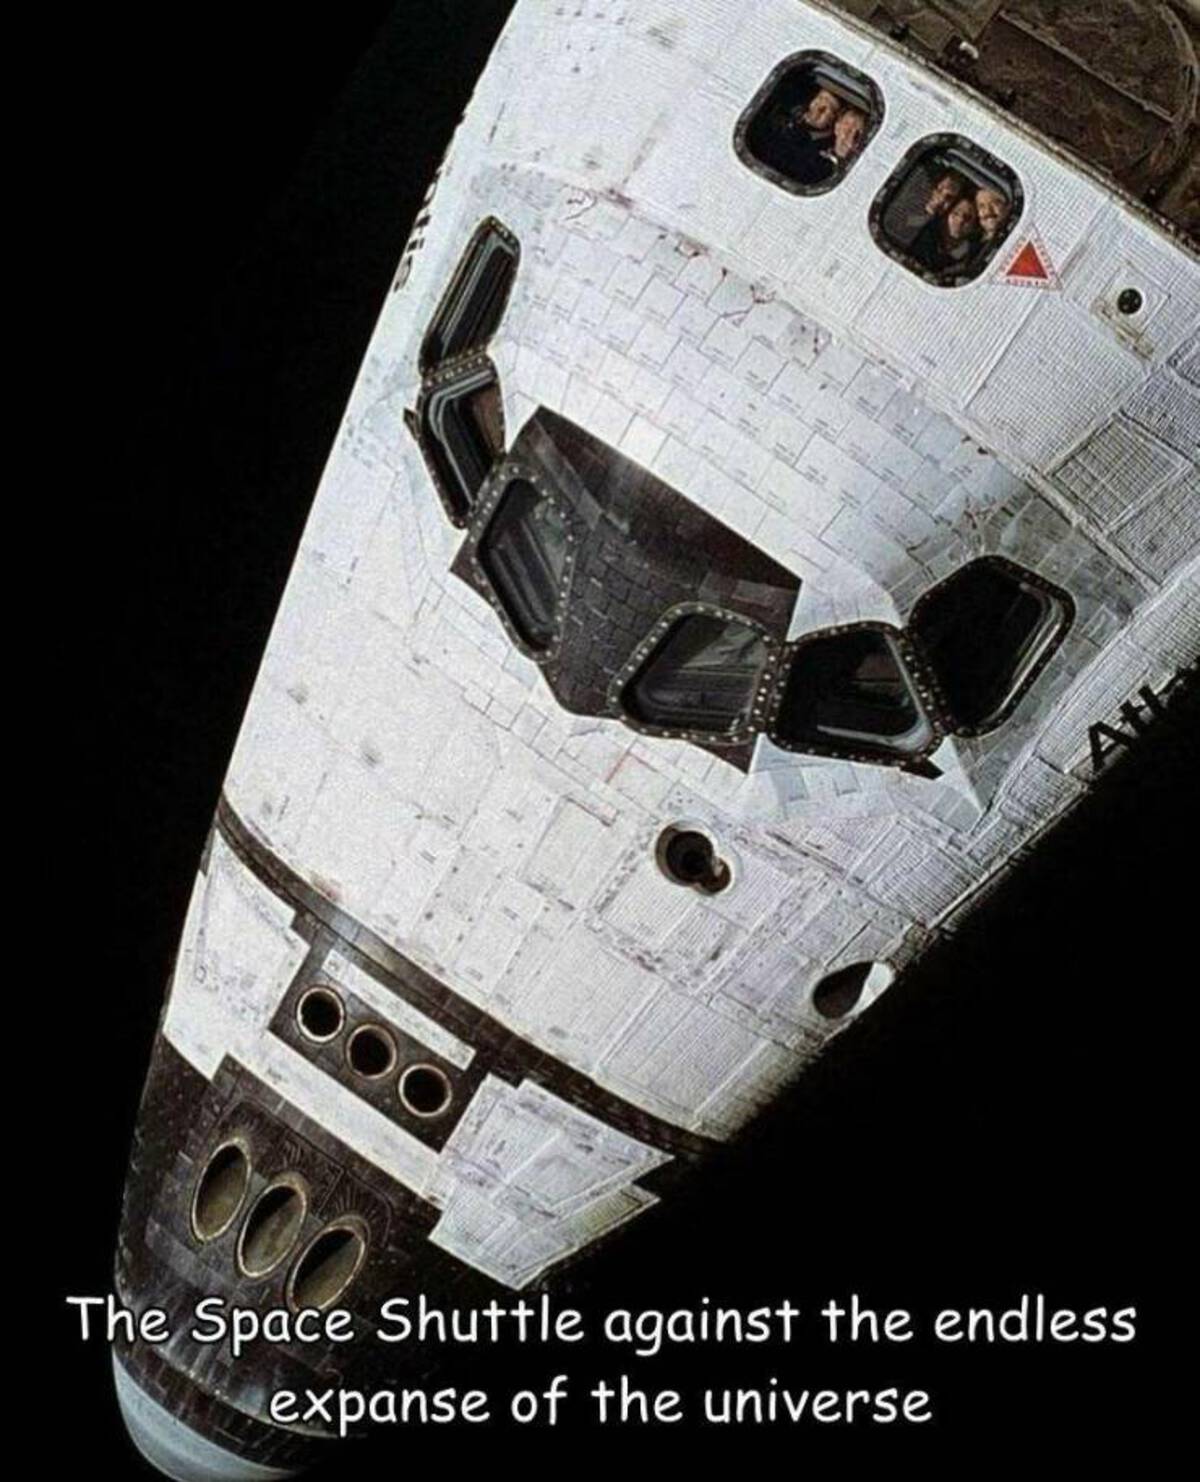 Ooo 00 The Space Shuttle against the endless expanse of the universe